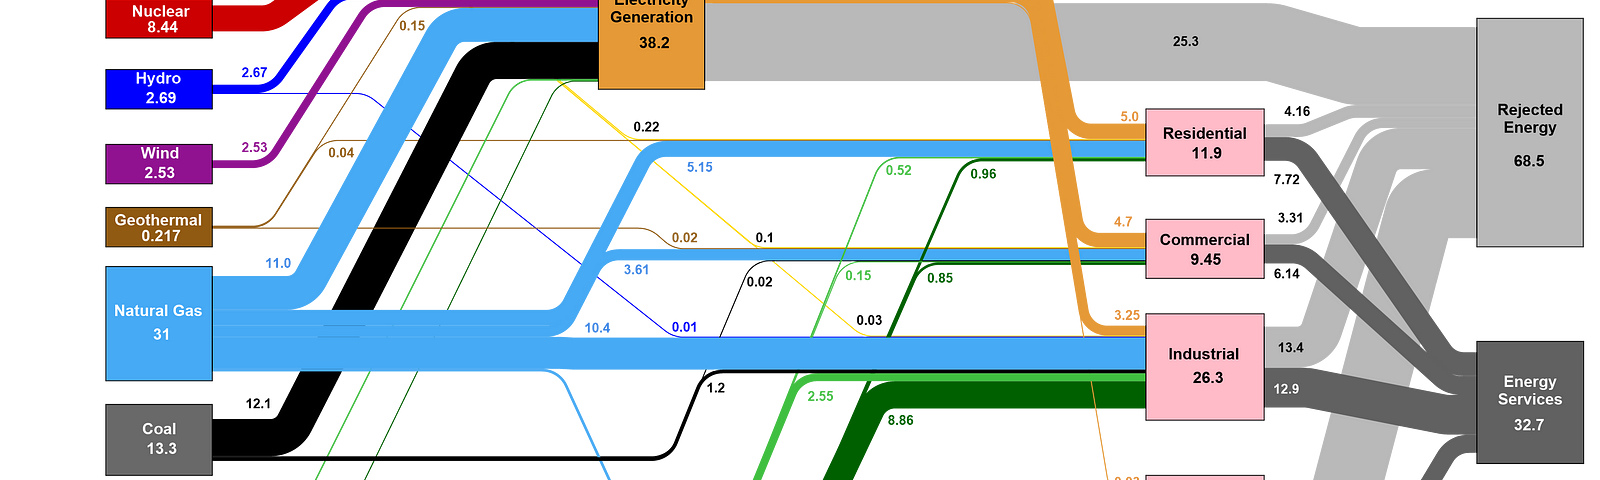 Flow of primary through secondary energy, productive energy services and rejected energy